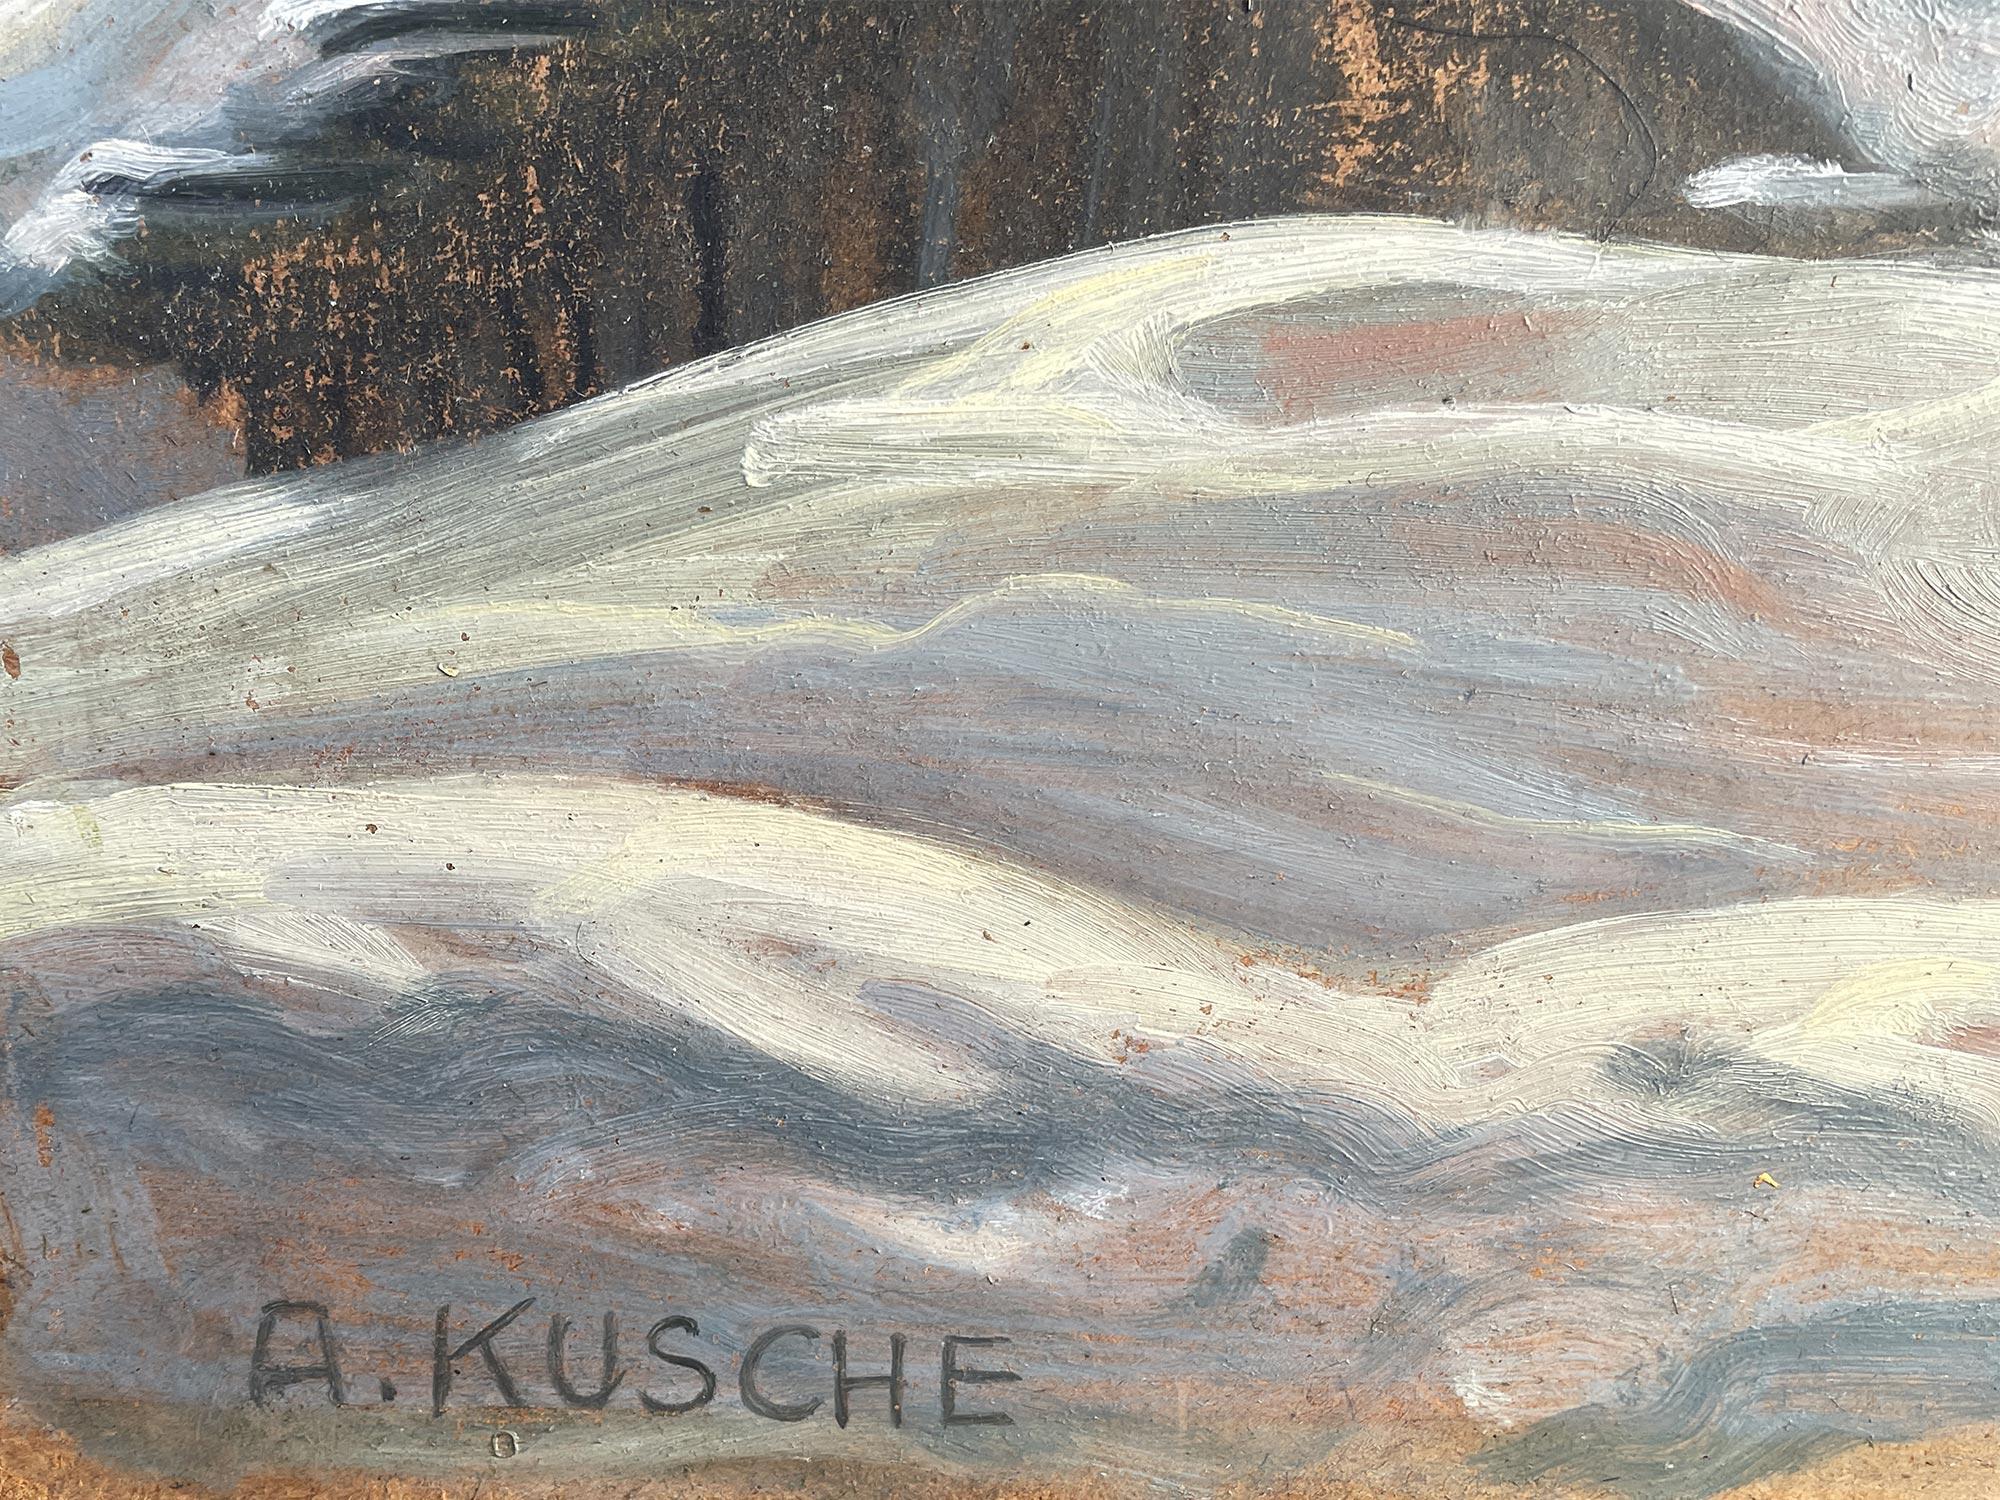 Snowy Landscape – Kusche Alfred

Opera size: 60 x 80 cm
Dimensions with cornice: 78 x 98 cm
Technique: oil on rigid cardboard
Period: year ’20

Suggestive winter paesaggio, one of those favorites of this picture

Kusche Alfred
Graphic, pictore (21